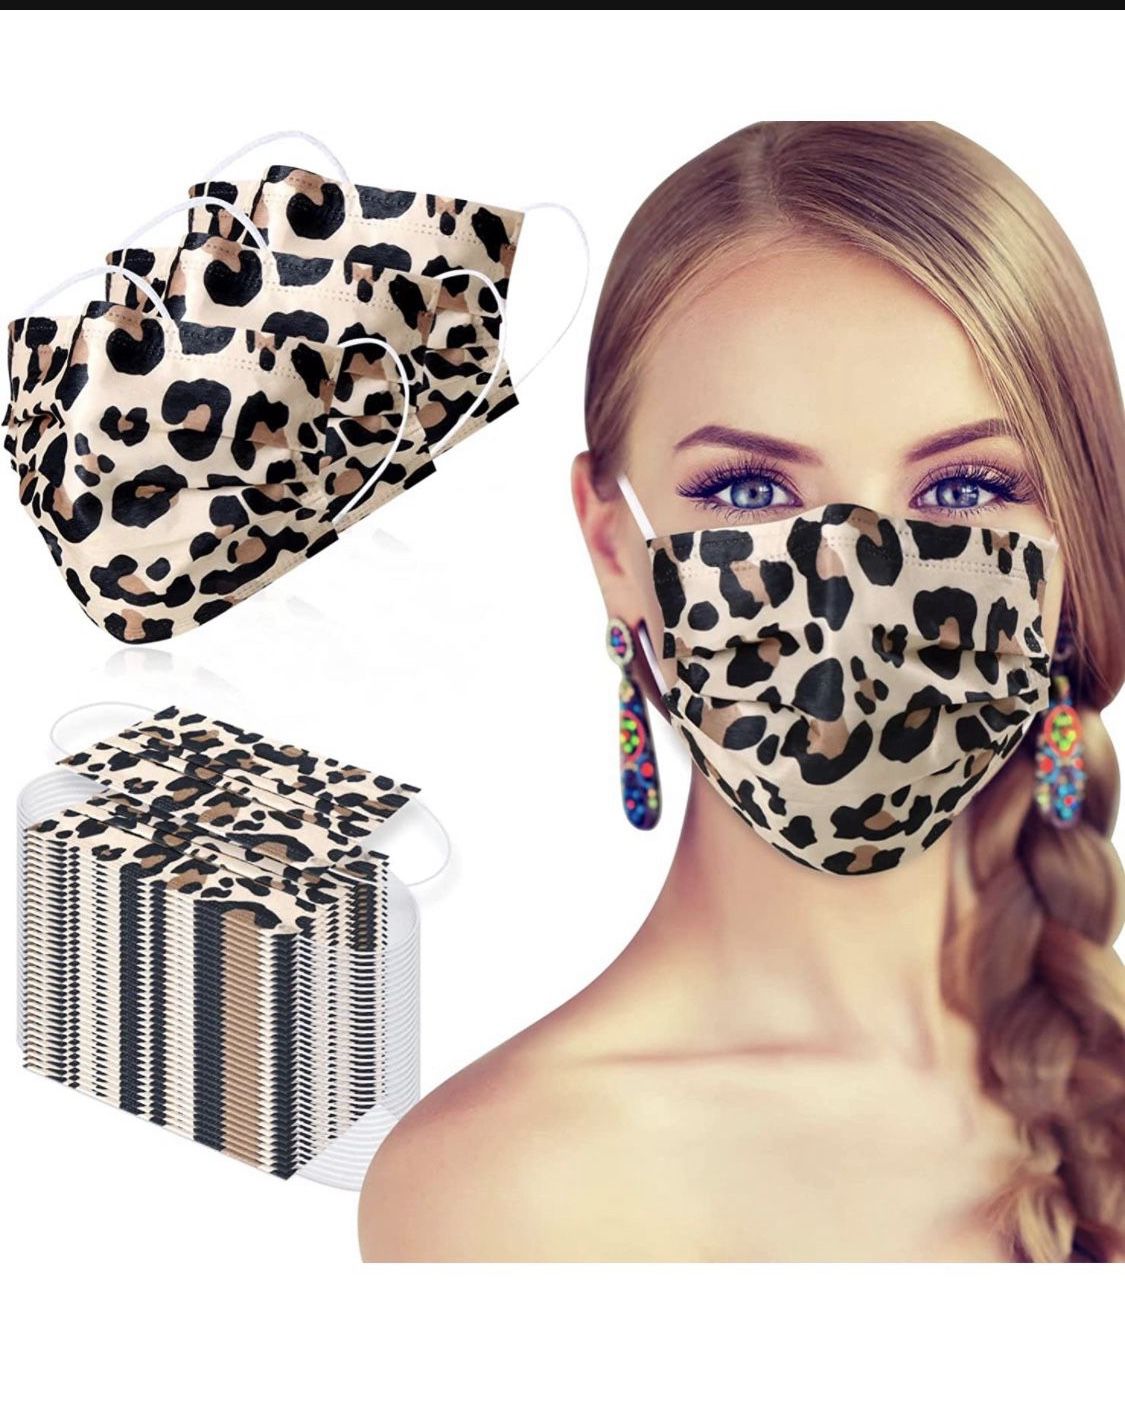 Disposable Face Mask - 50pcs Comfortable Protective Mouth Cover,Printed Cheetah Face Mask Adults, 3-Ply Breathable Safety Mask for Indoor Outdoor Home